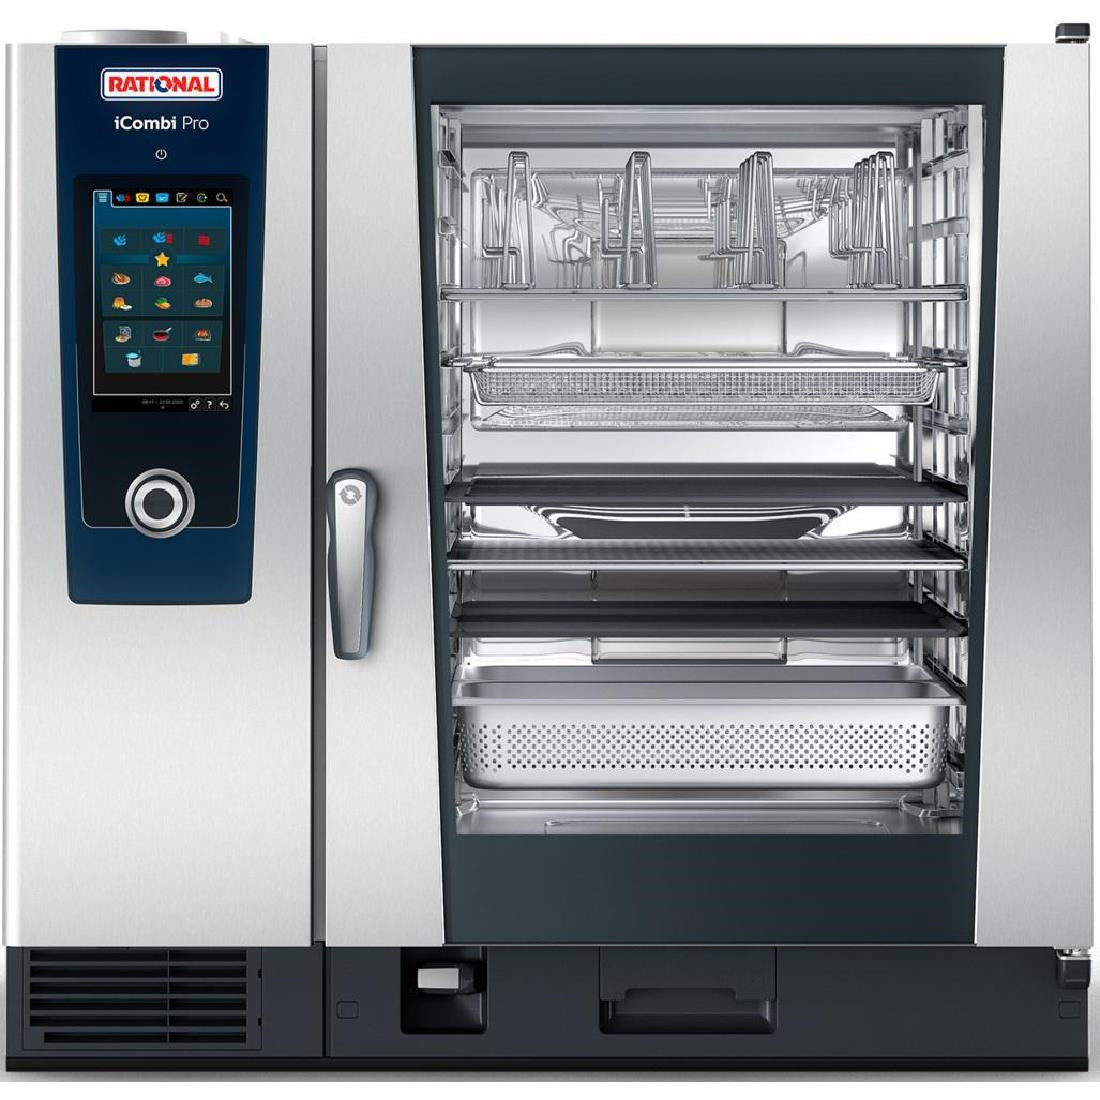 Rational iCombi Classic Combi Oven ICC 10-2/1/E.Product Ref:00662.Model:ICC 10-2/1/E 🚚 3-5 DAYS DELIVERY